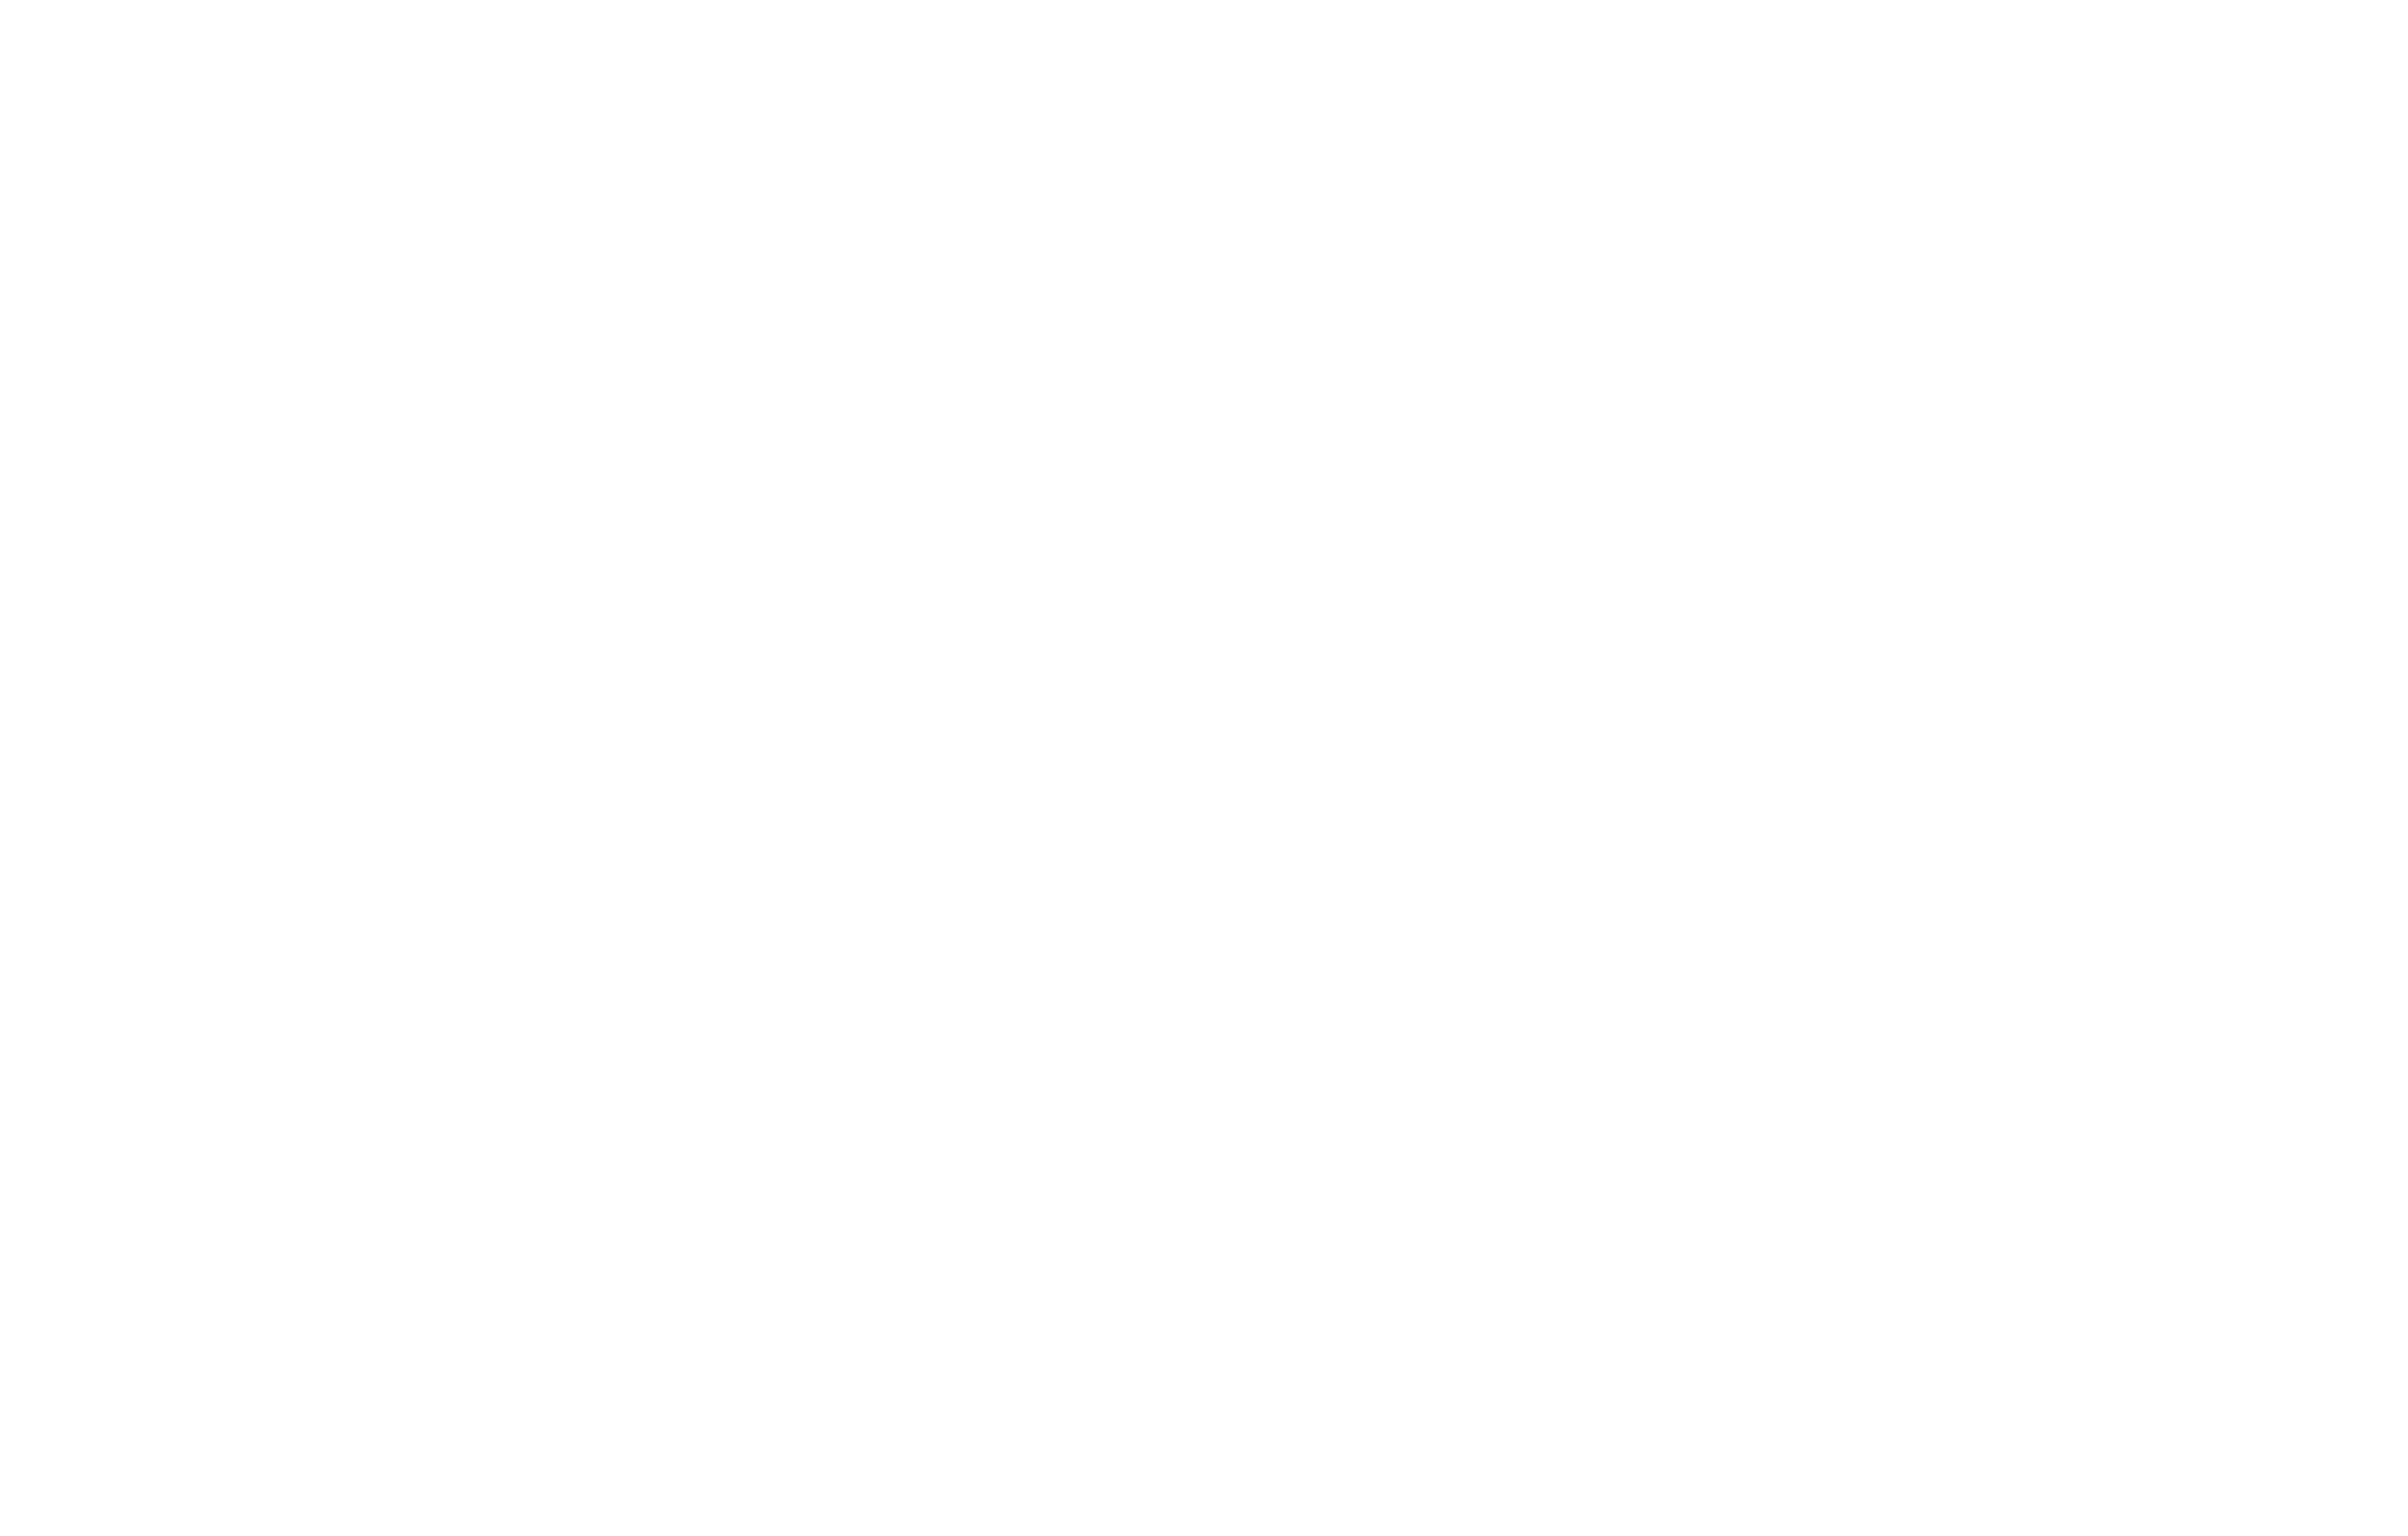 doscuiners platets i postres sl